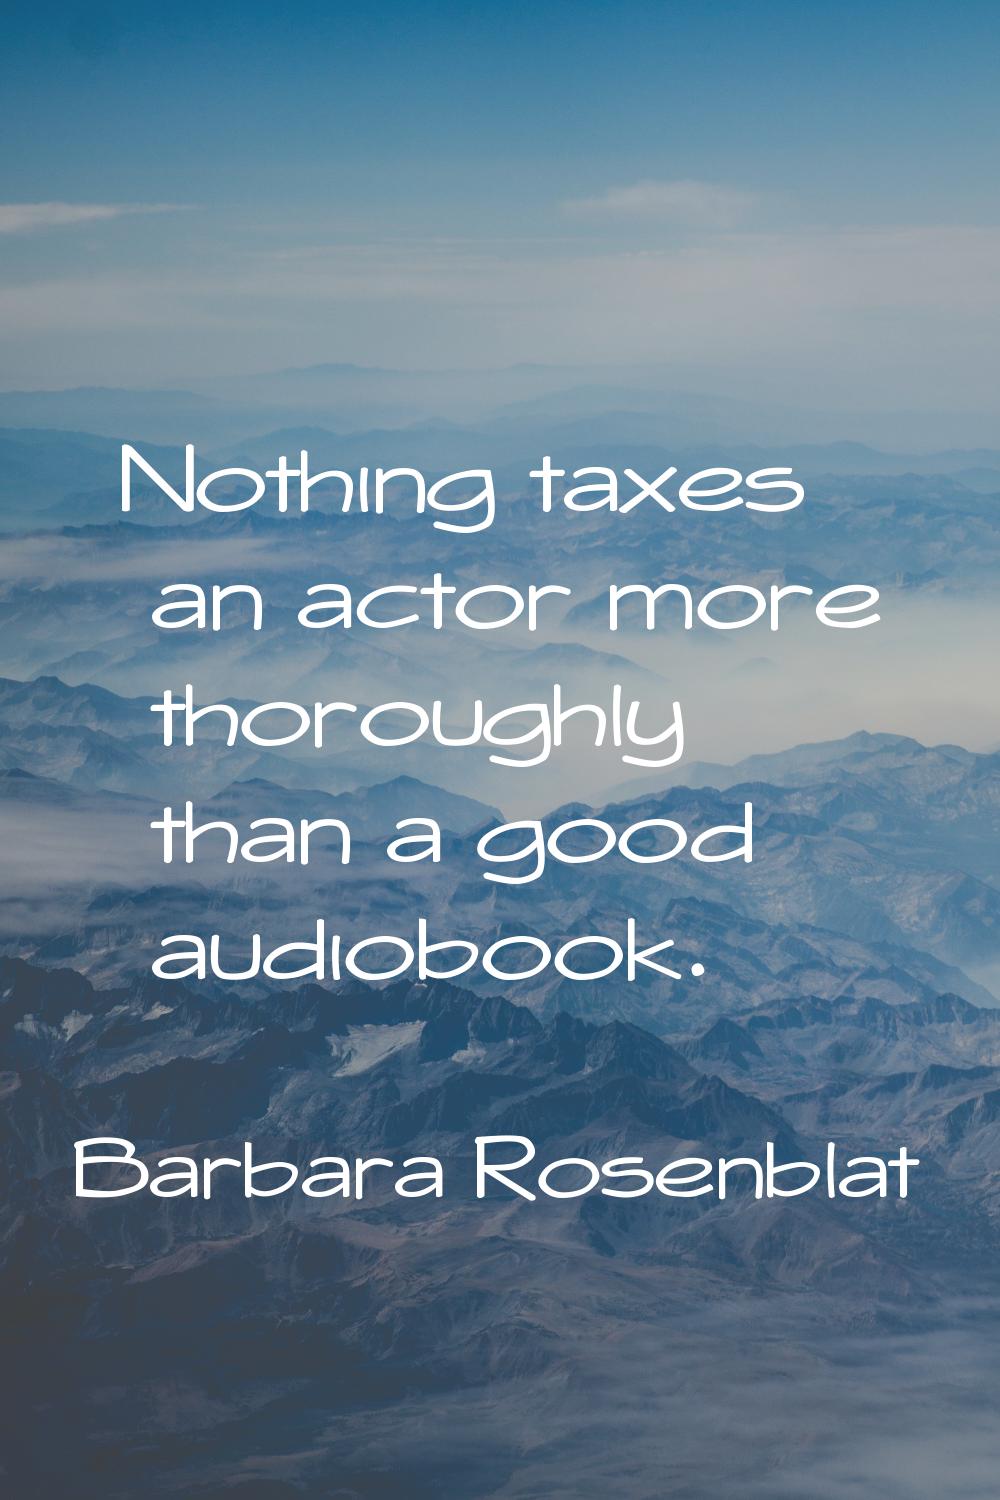 Nothing taxes an actor more thoroughly than a good audiobook.